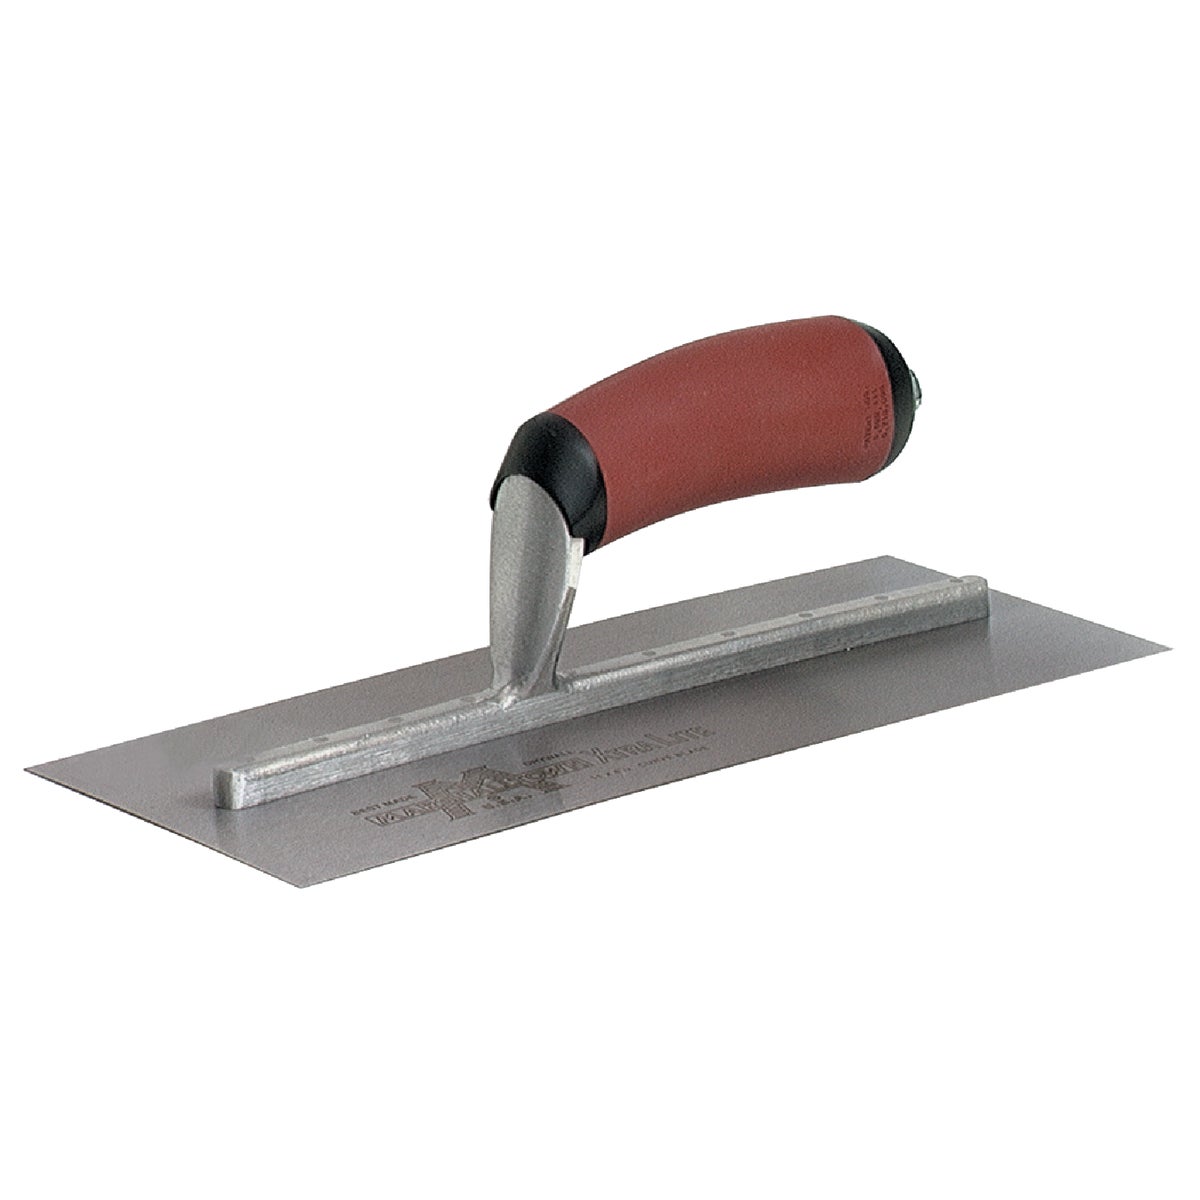 Item 370673, High-grade steel blade has a slight concave bow in the blade which helps 